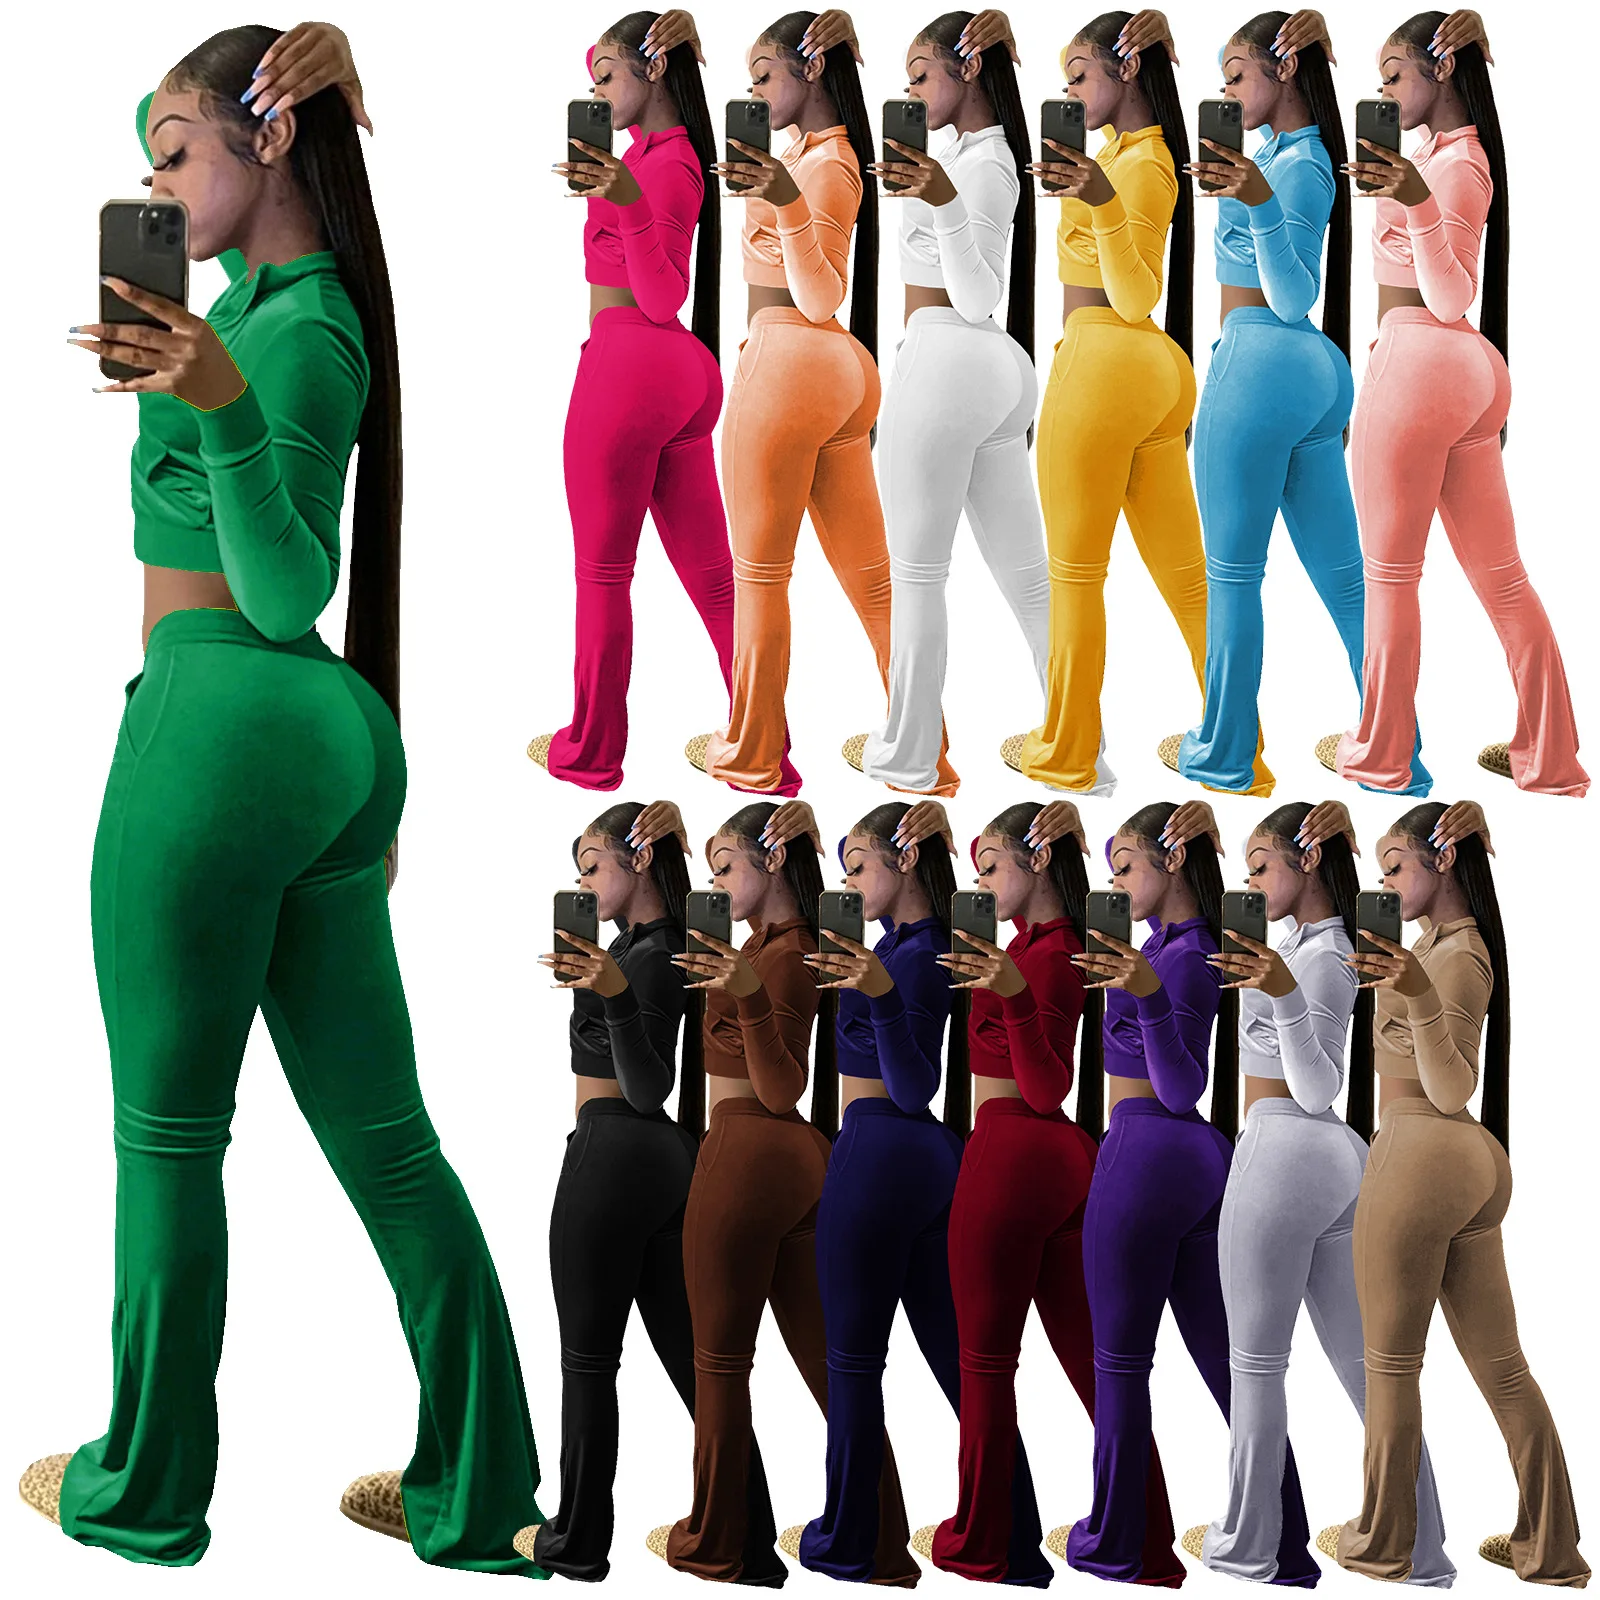 2021 Fall women clothing velour tracksuit long sleeves hoodie sweatsuit crop top 2 piece pants set outfit  velvet two piece set